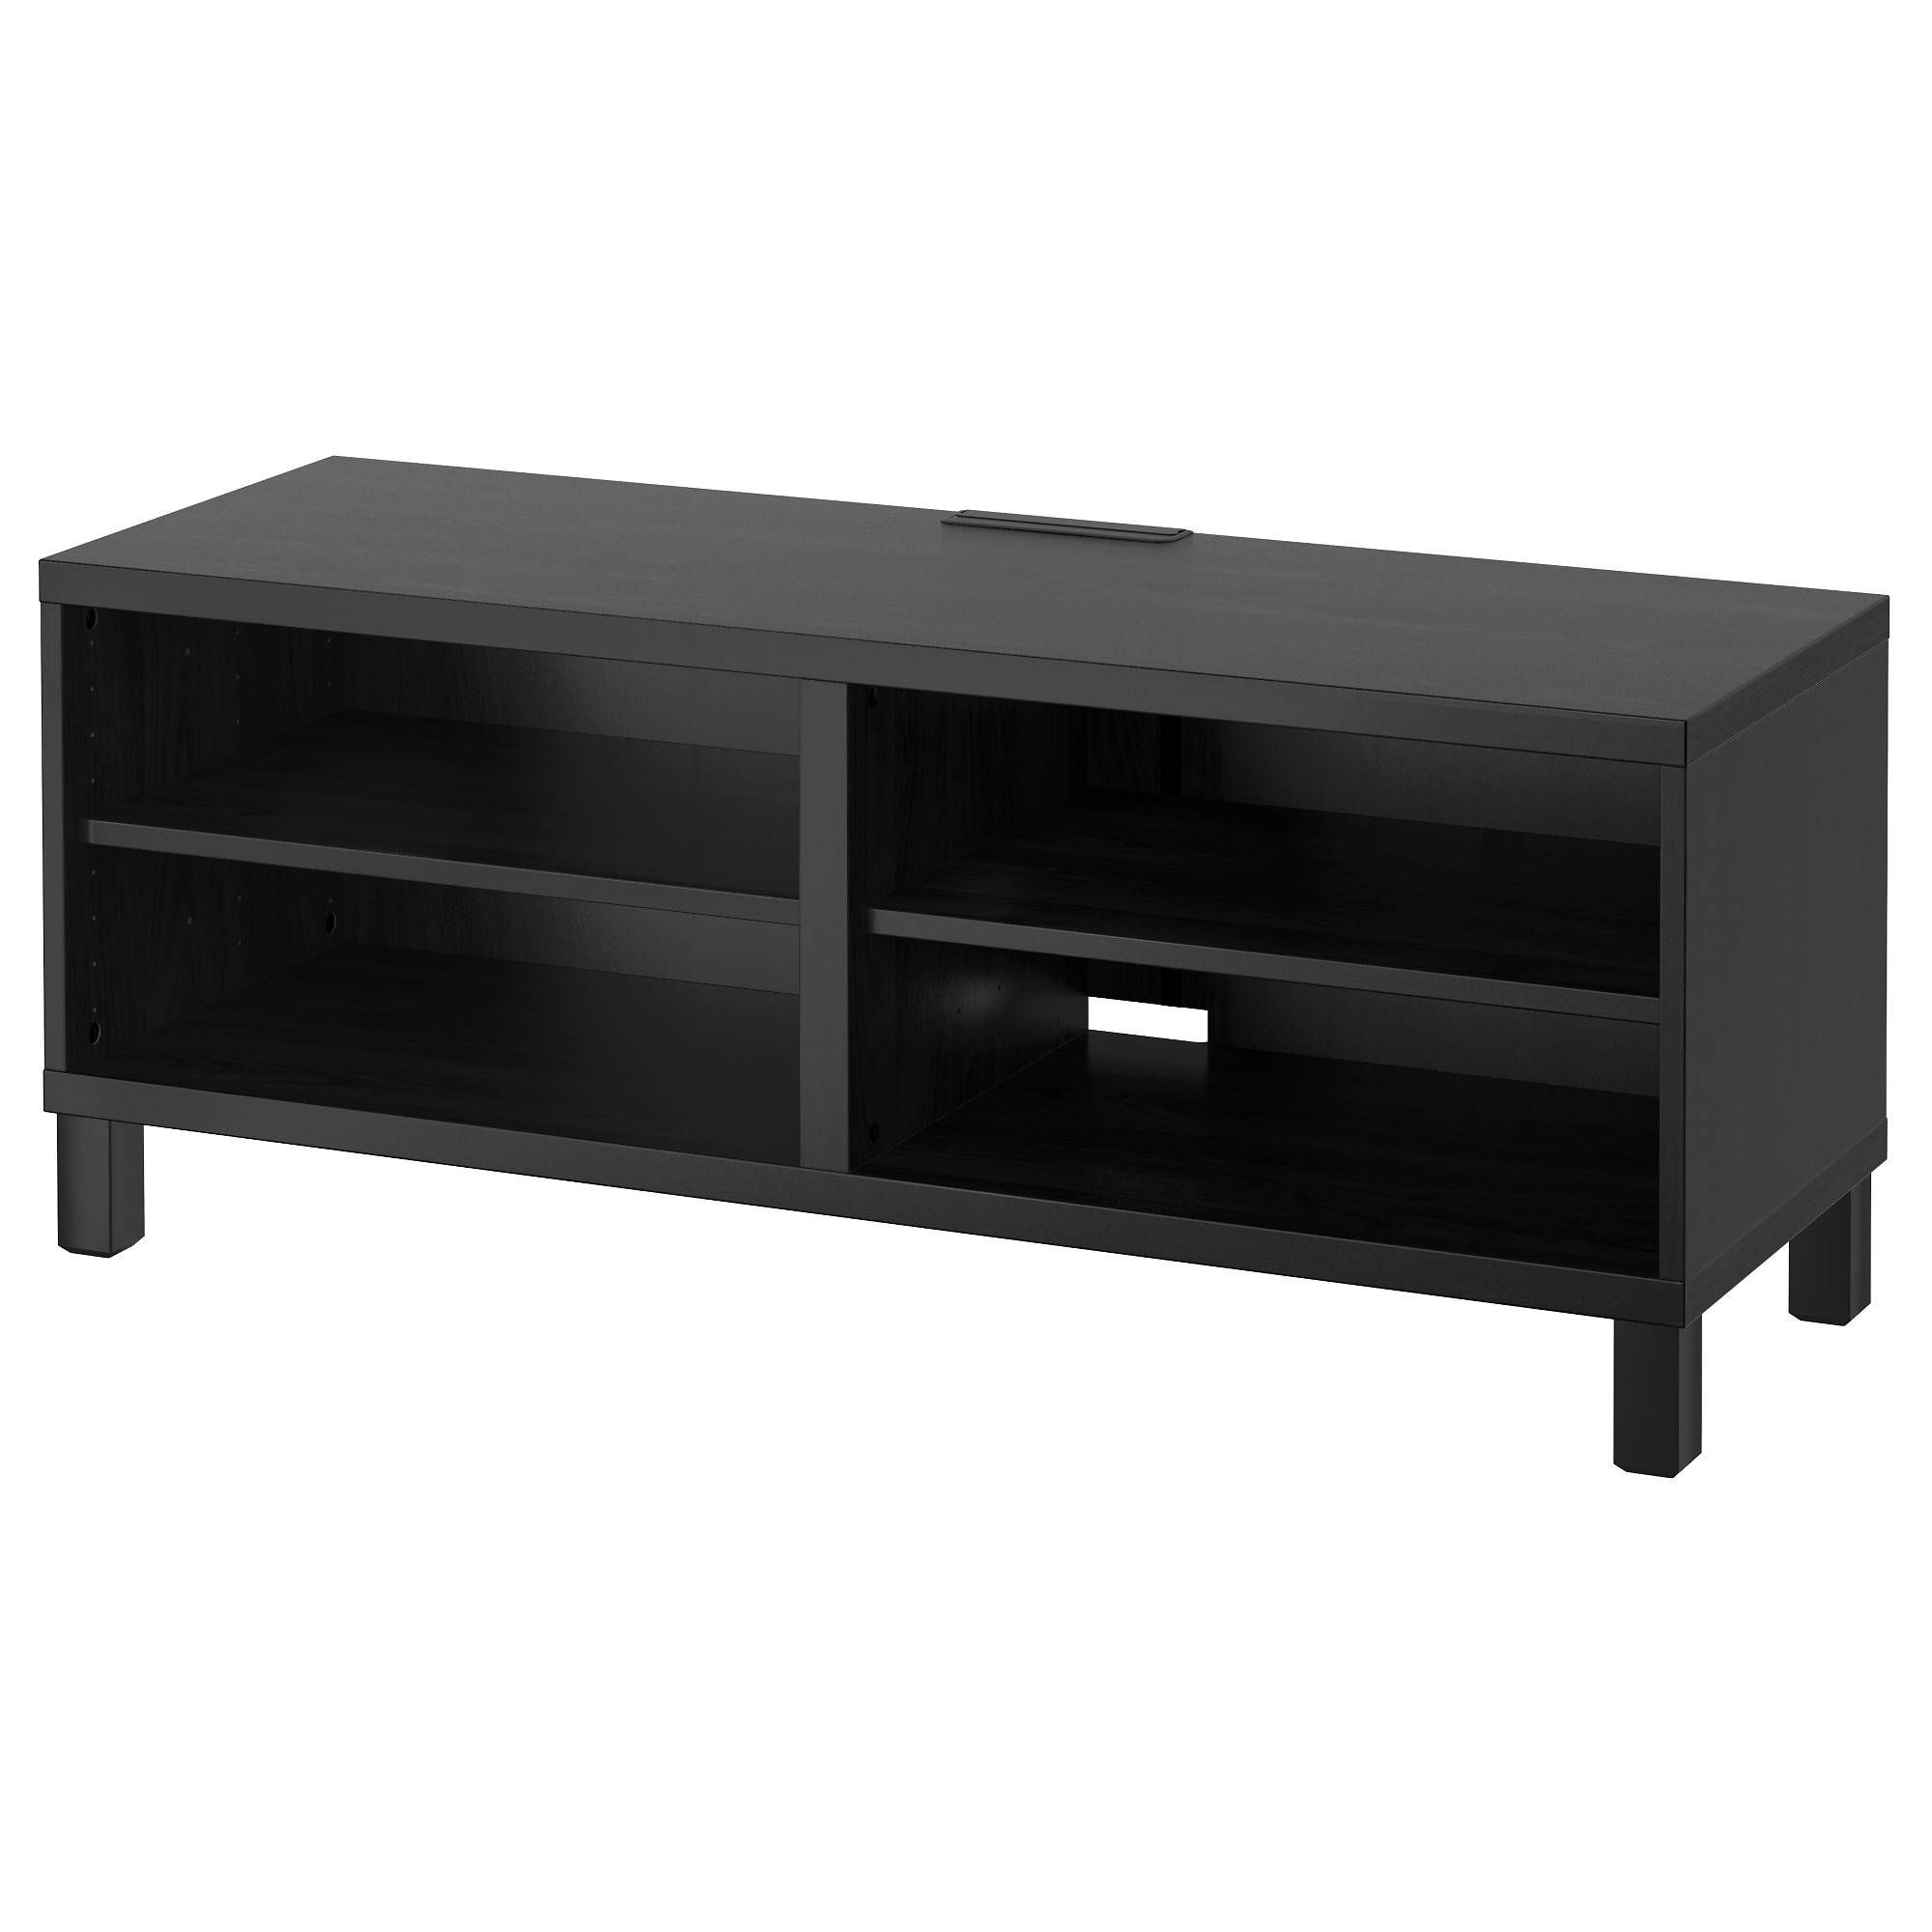 Large Tv Stands & Entertainment Centers – Ikea For Large Black Tv Unit (View 6 of 15)